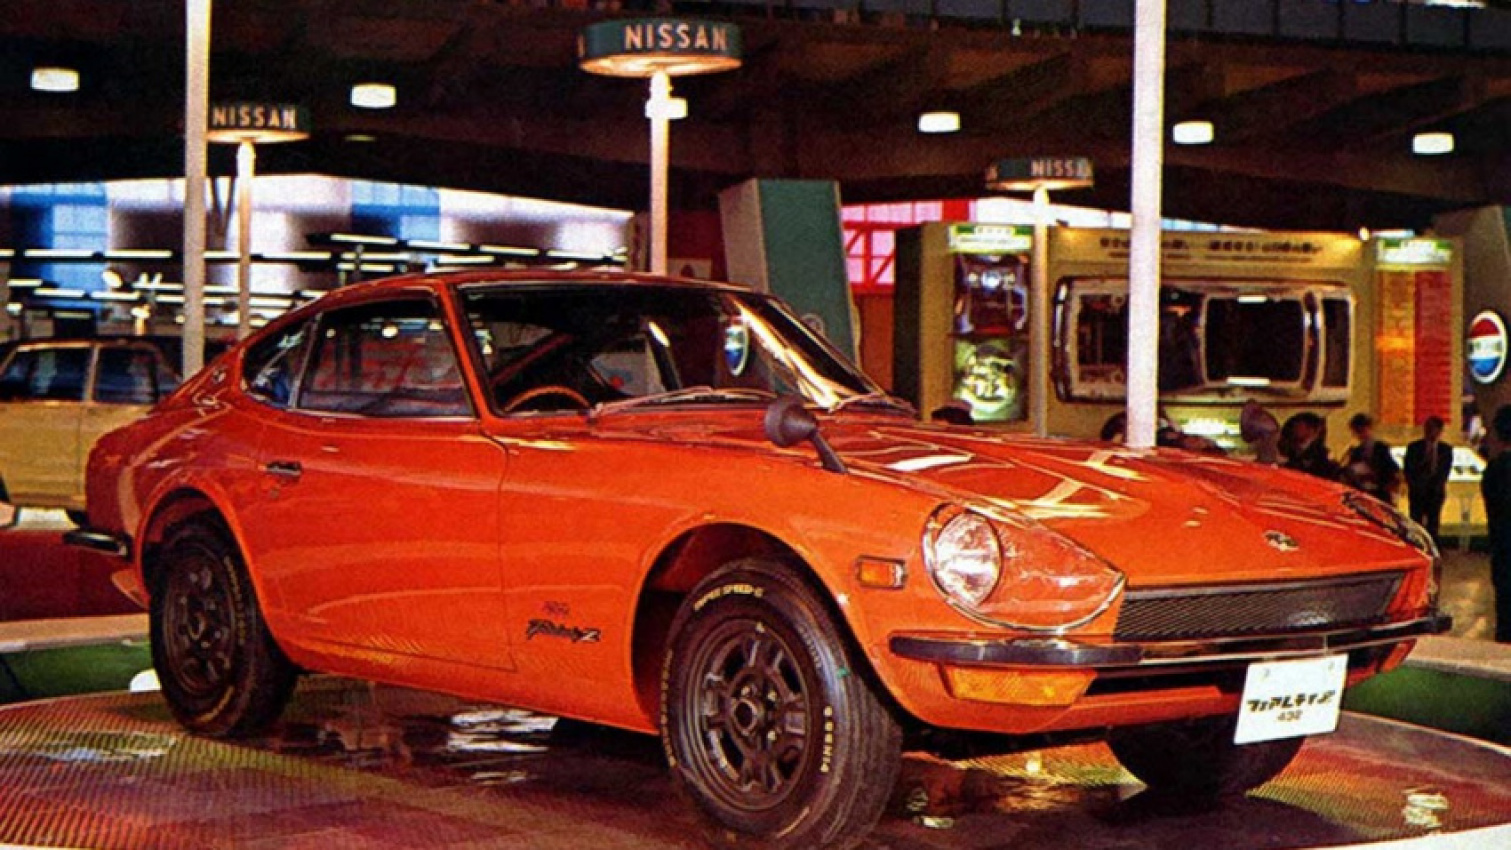 autos, cars, datsun, end of the road for the datsun brand